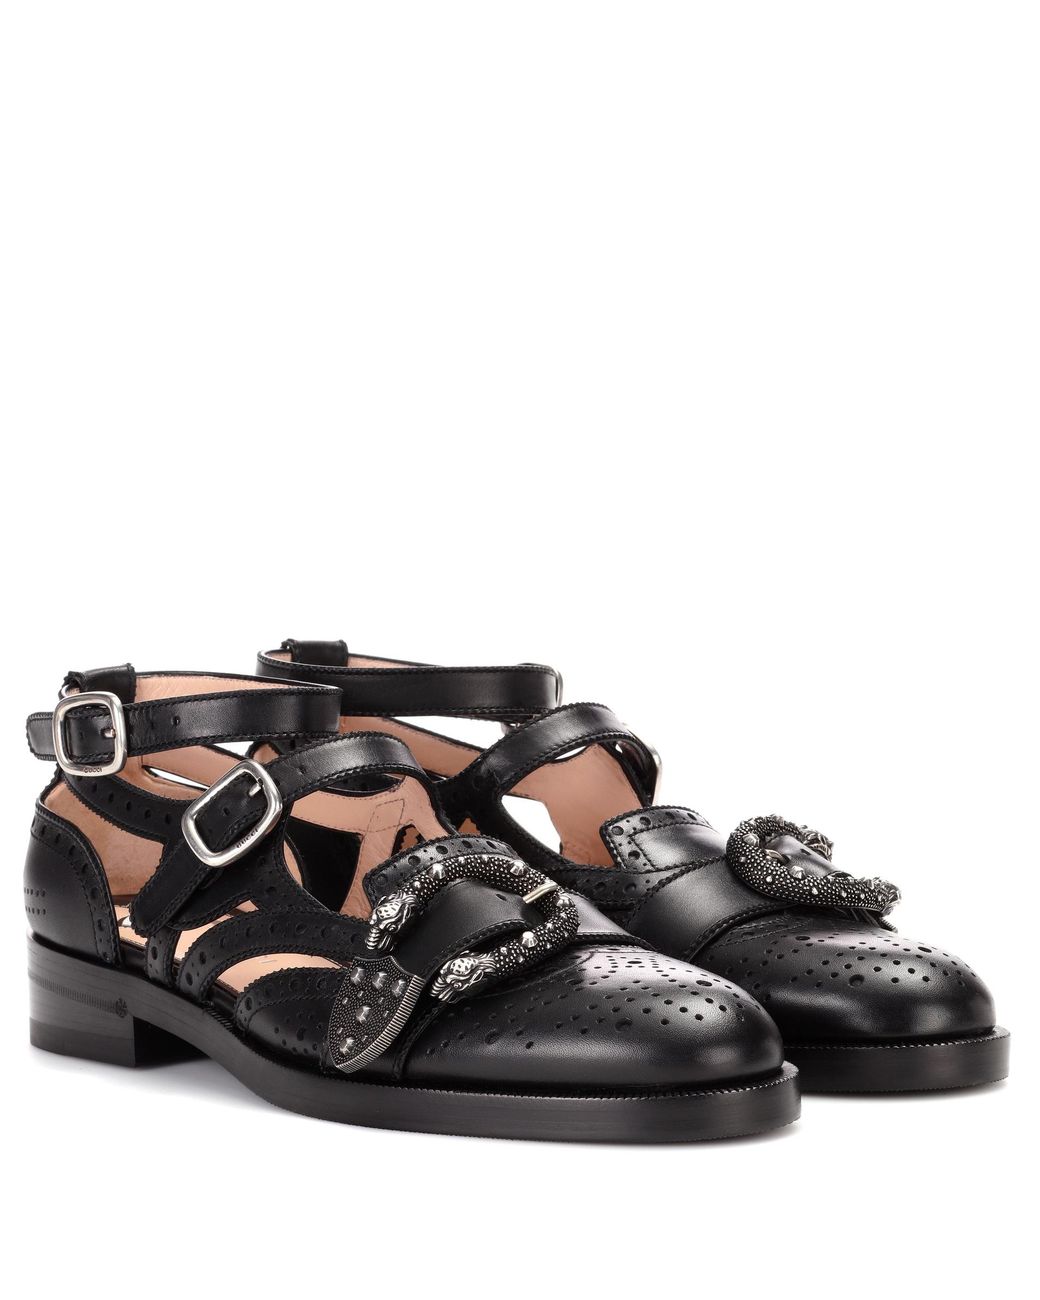 Gucci Queercore Brogue Monk Shoes in Black | Lyst